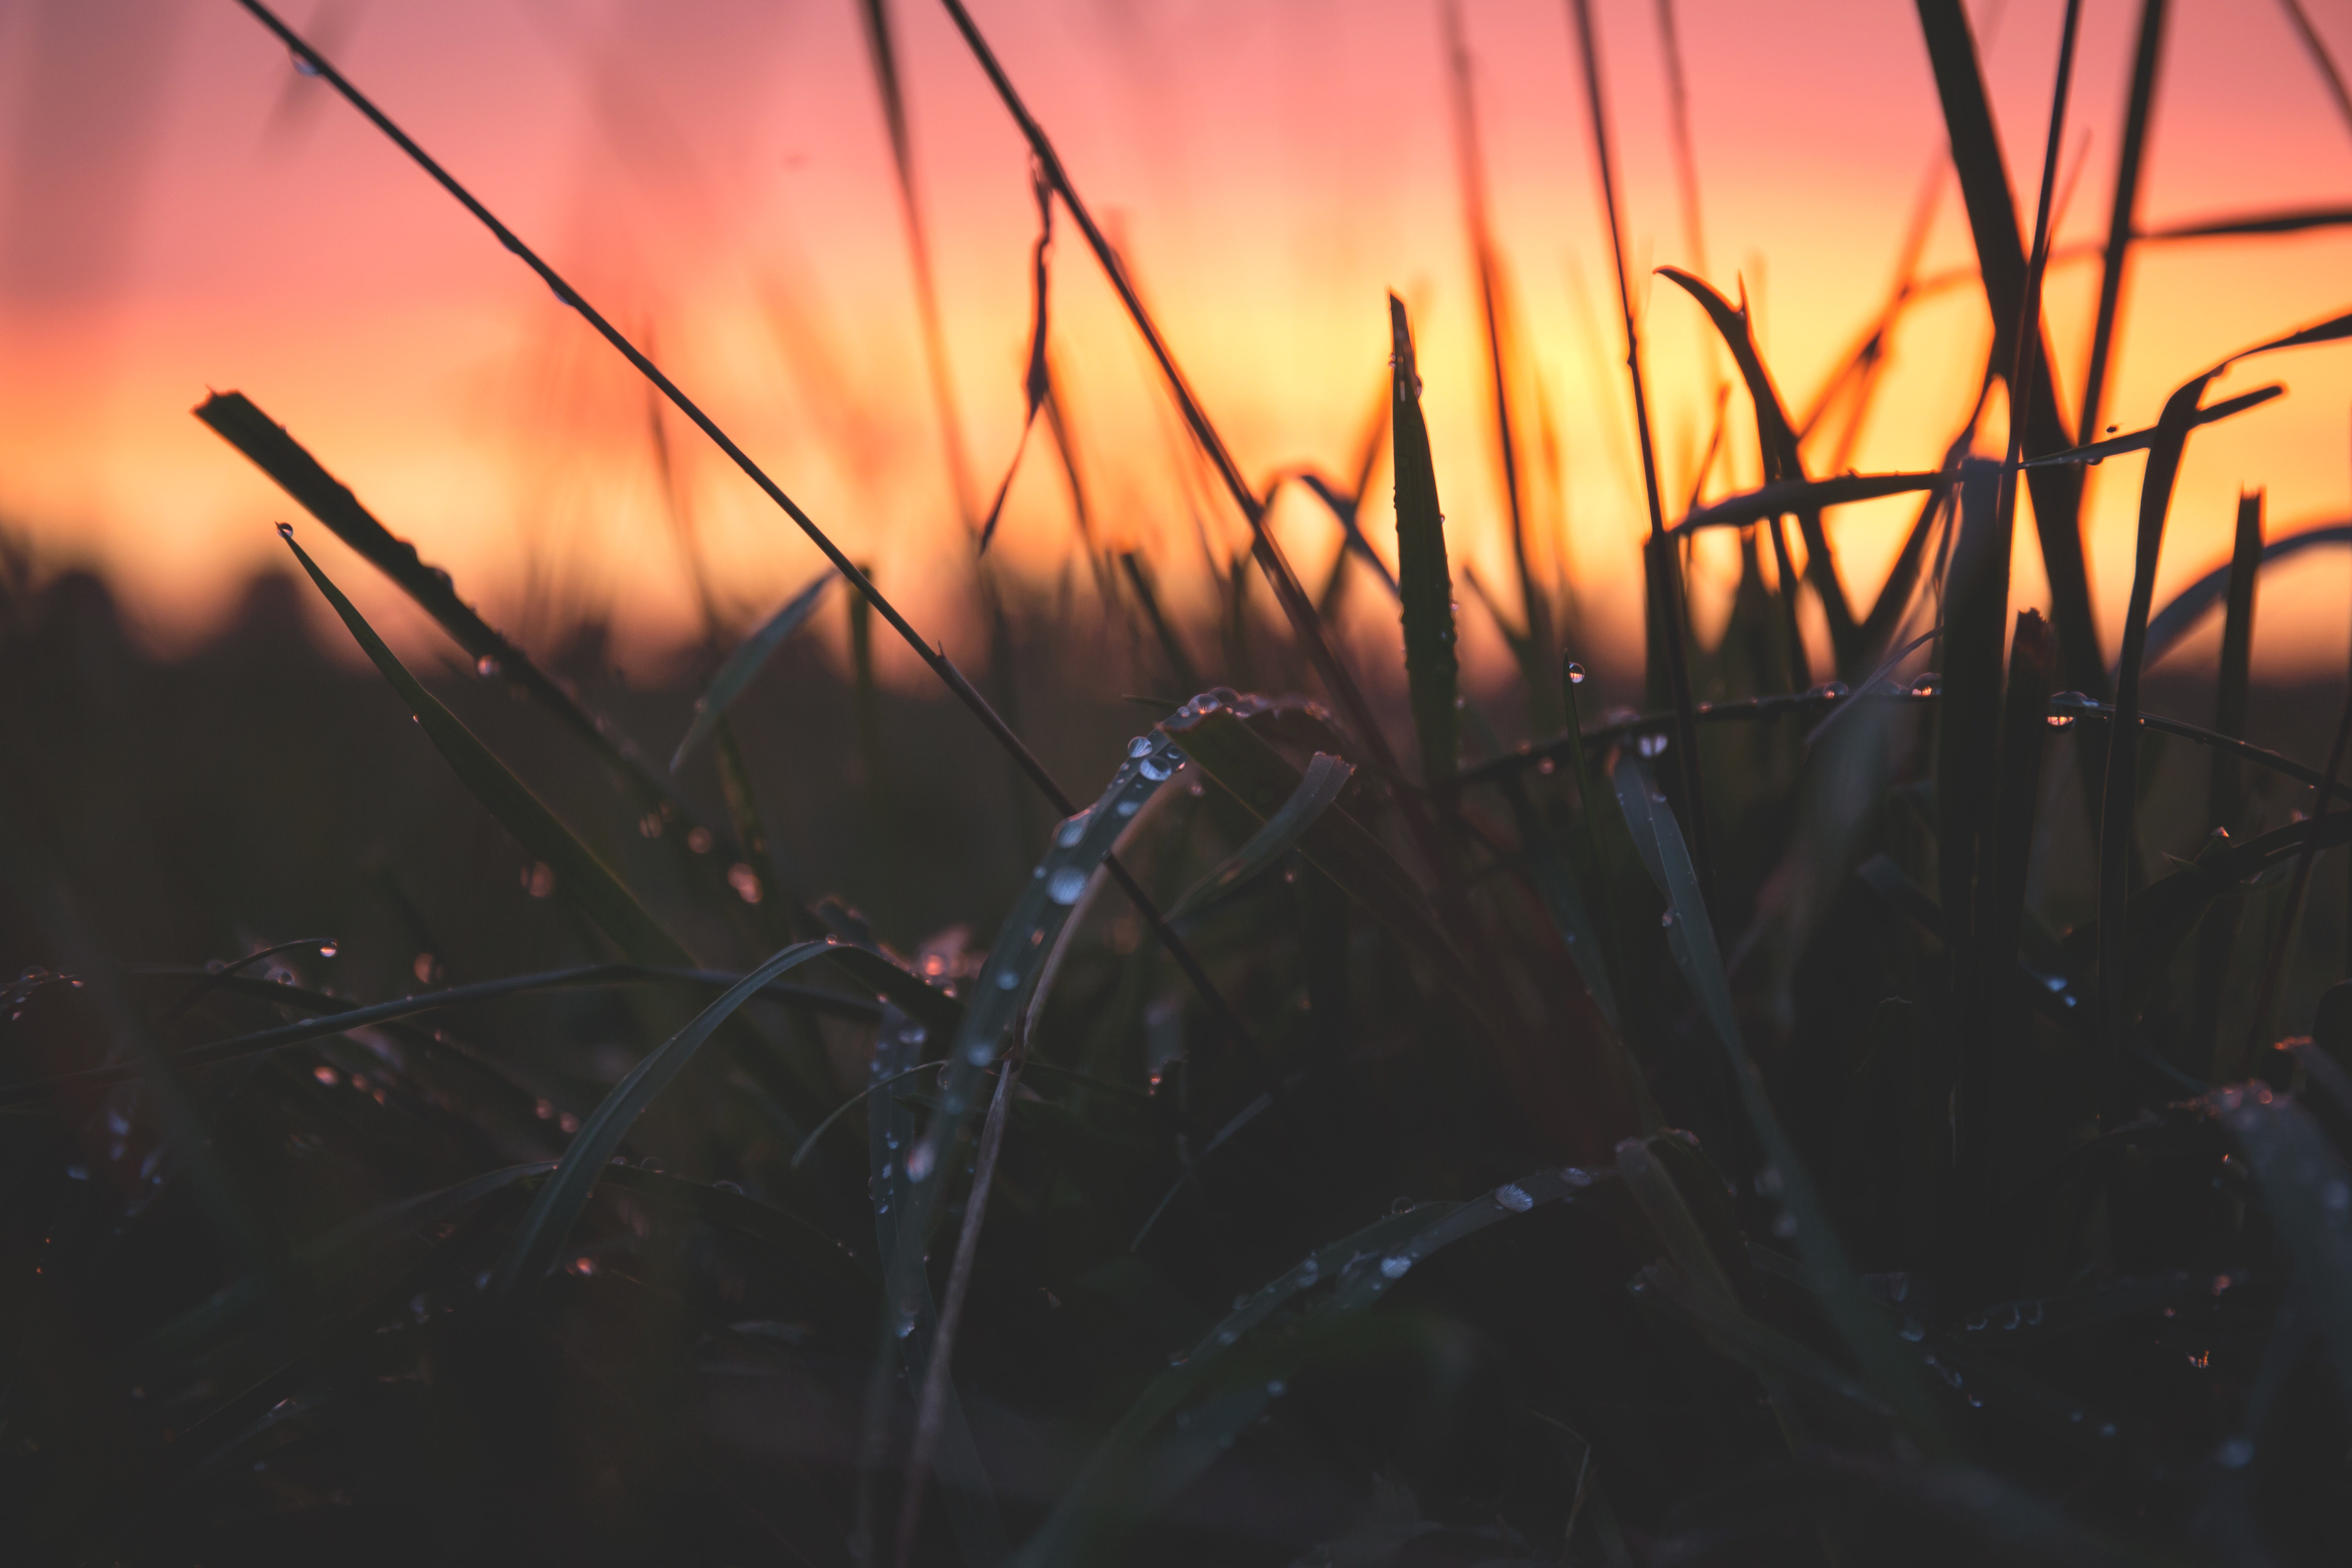 Grass with water drops during sunset photo